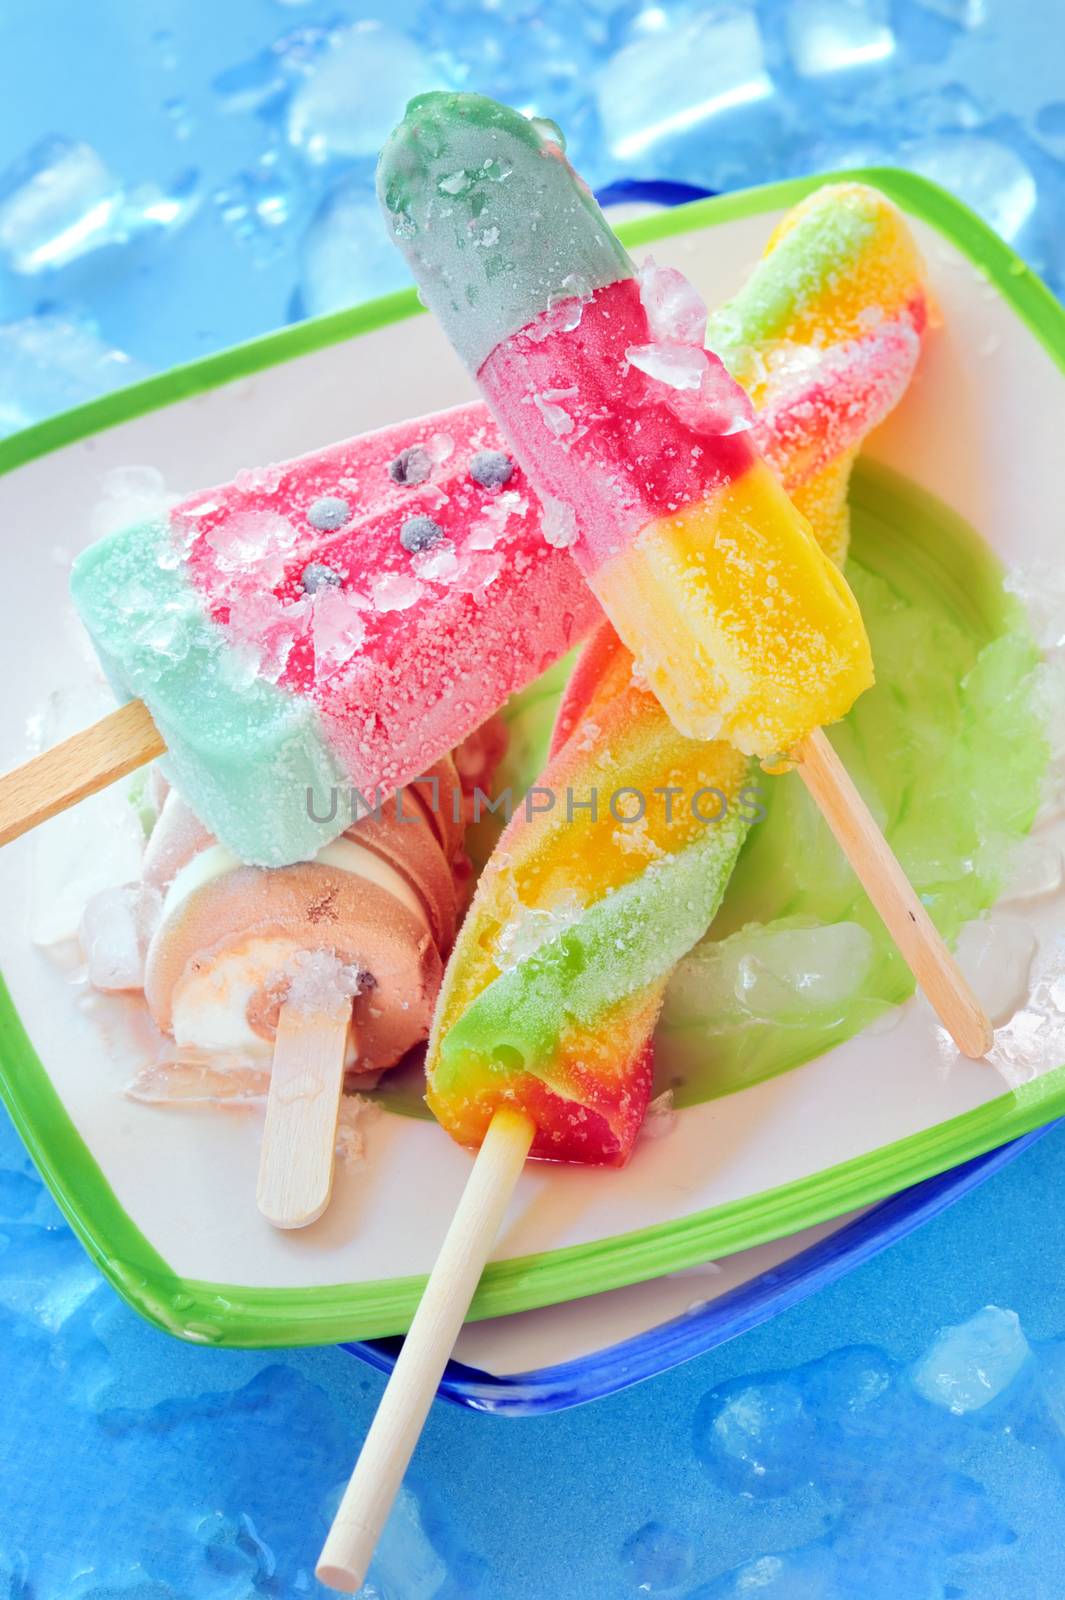 Icecream and popsicle with ice cubes